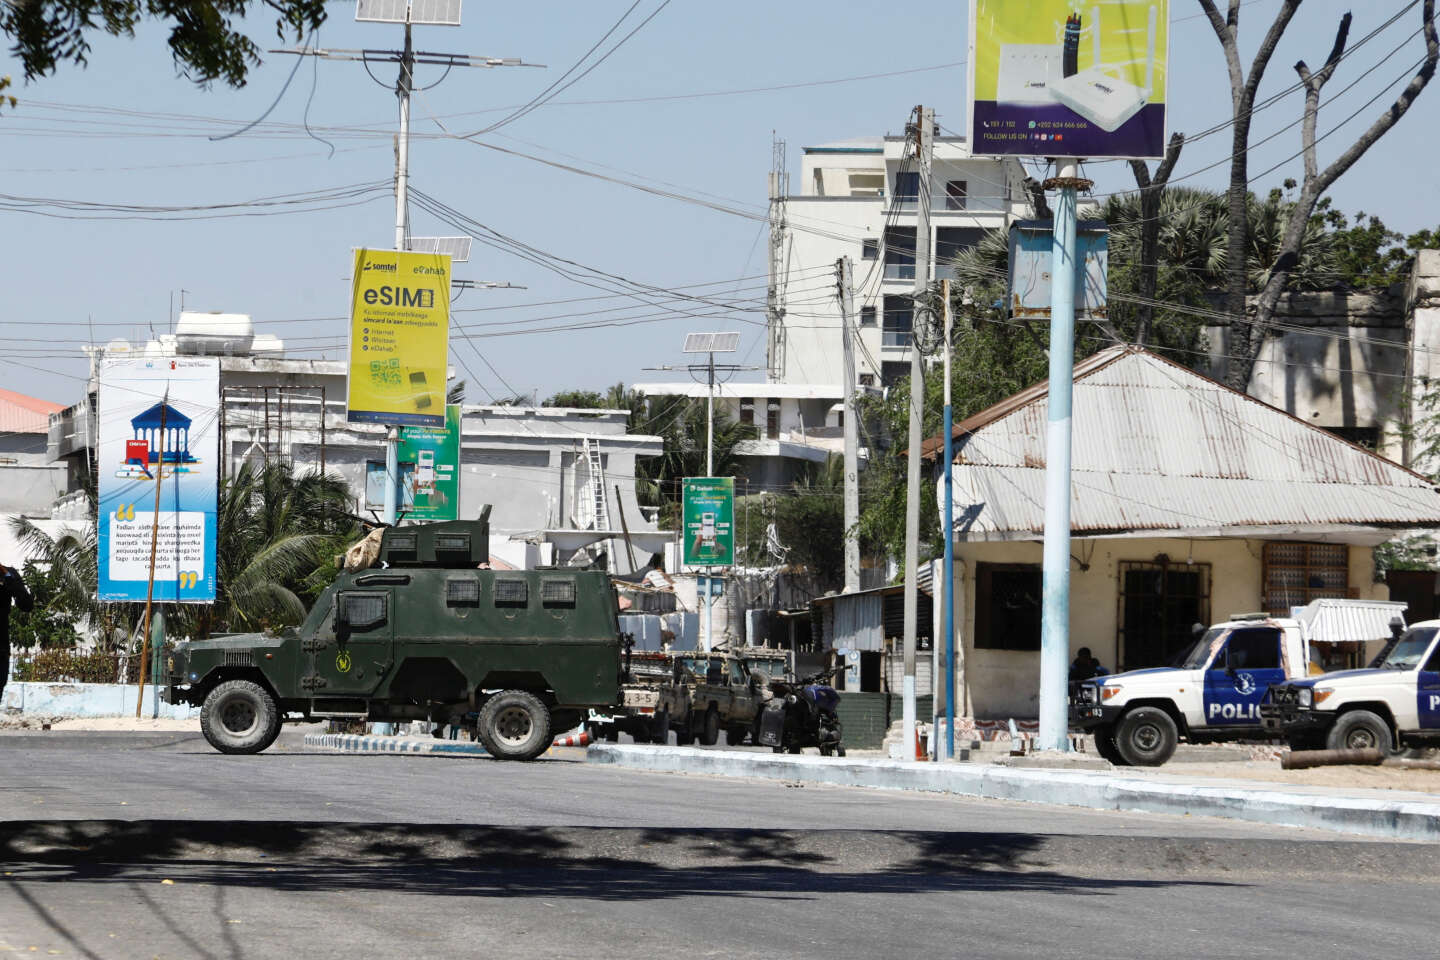 In Somalia, an al-Shabaab attack on a hotel in Mogadishu killed at least three people and wounded twenty-seven others.